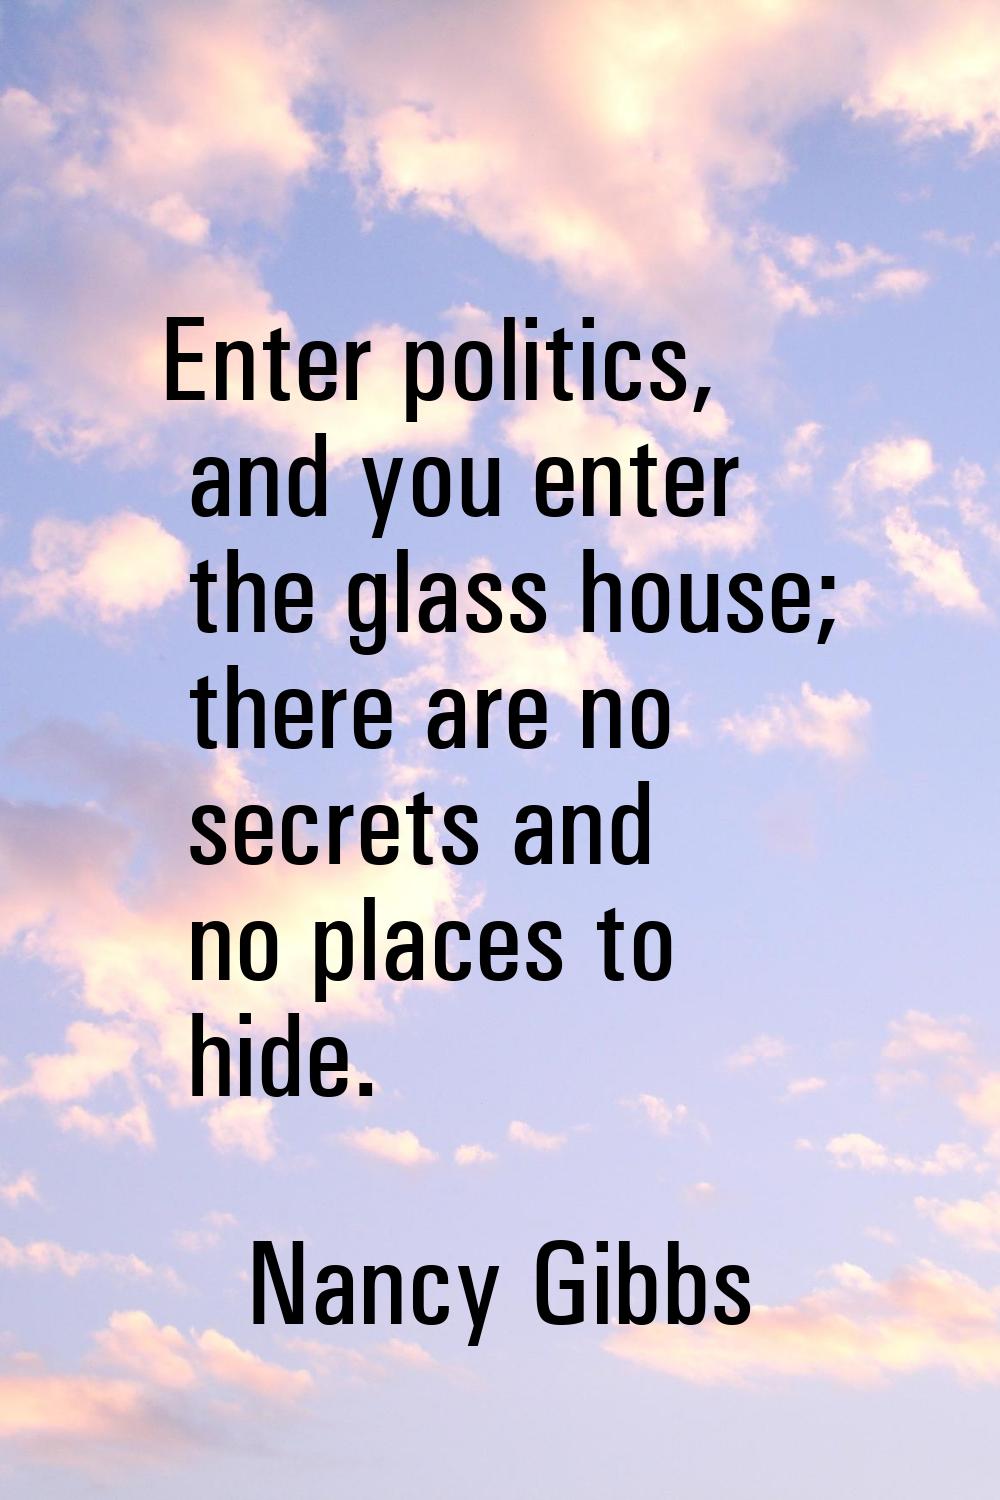 Enter politics, and you enter the glass house; there are no secrets and no places to hide.